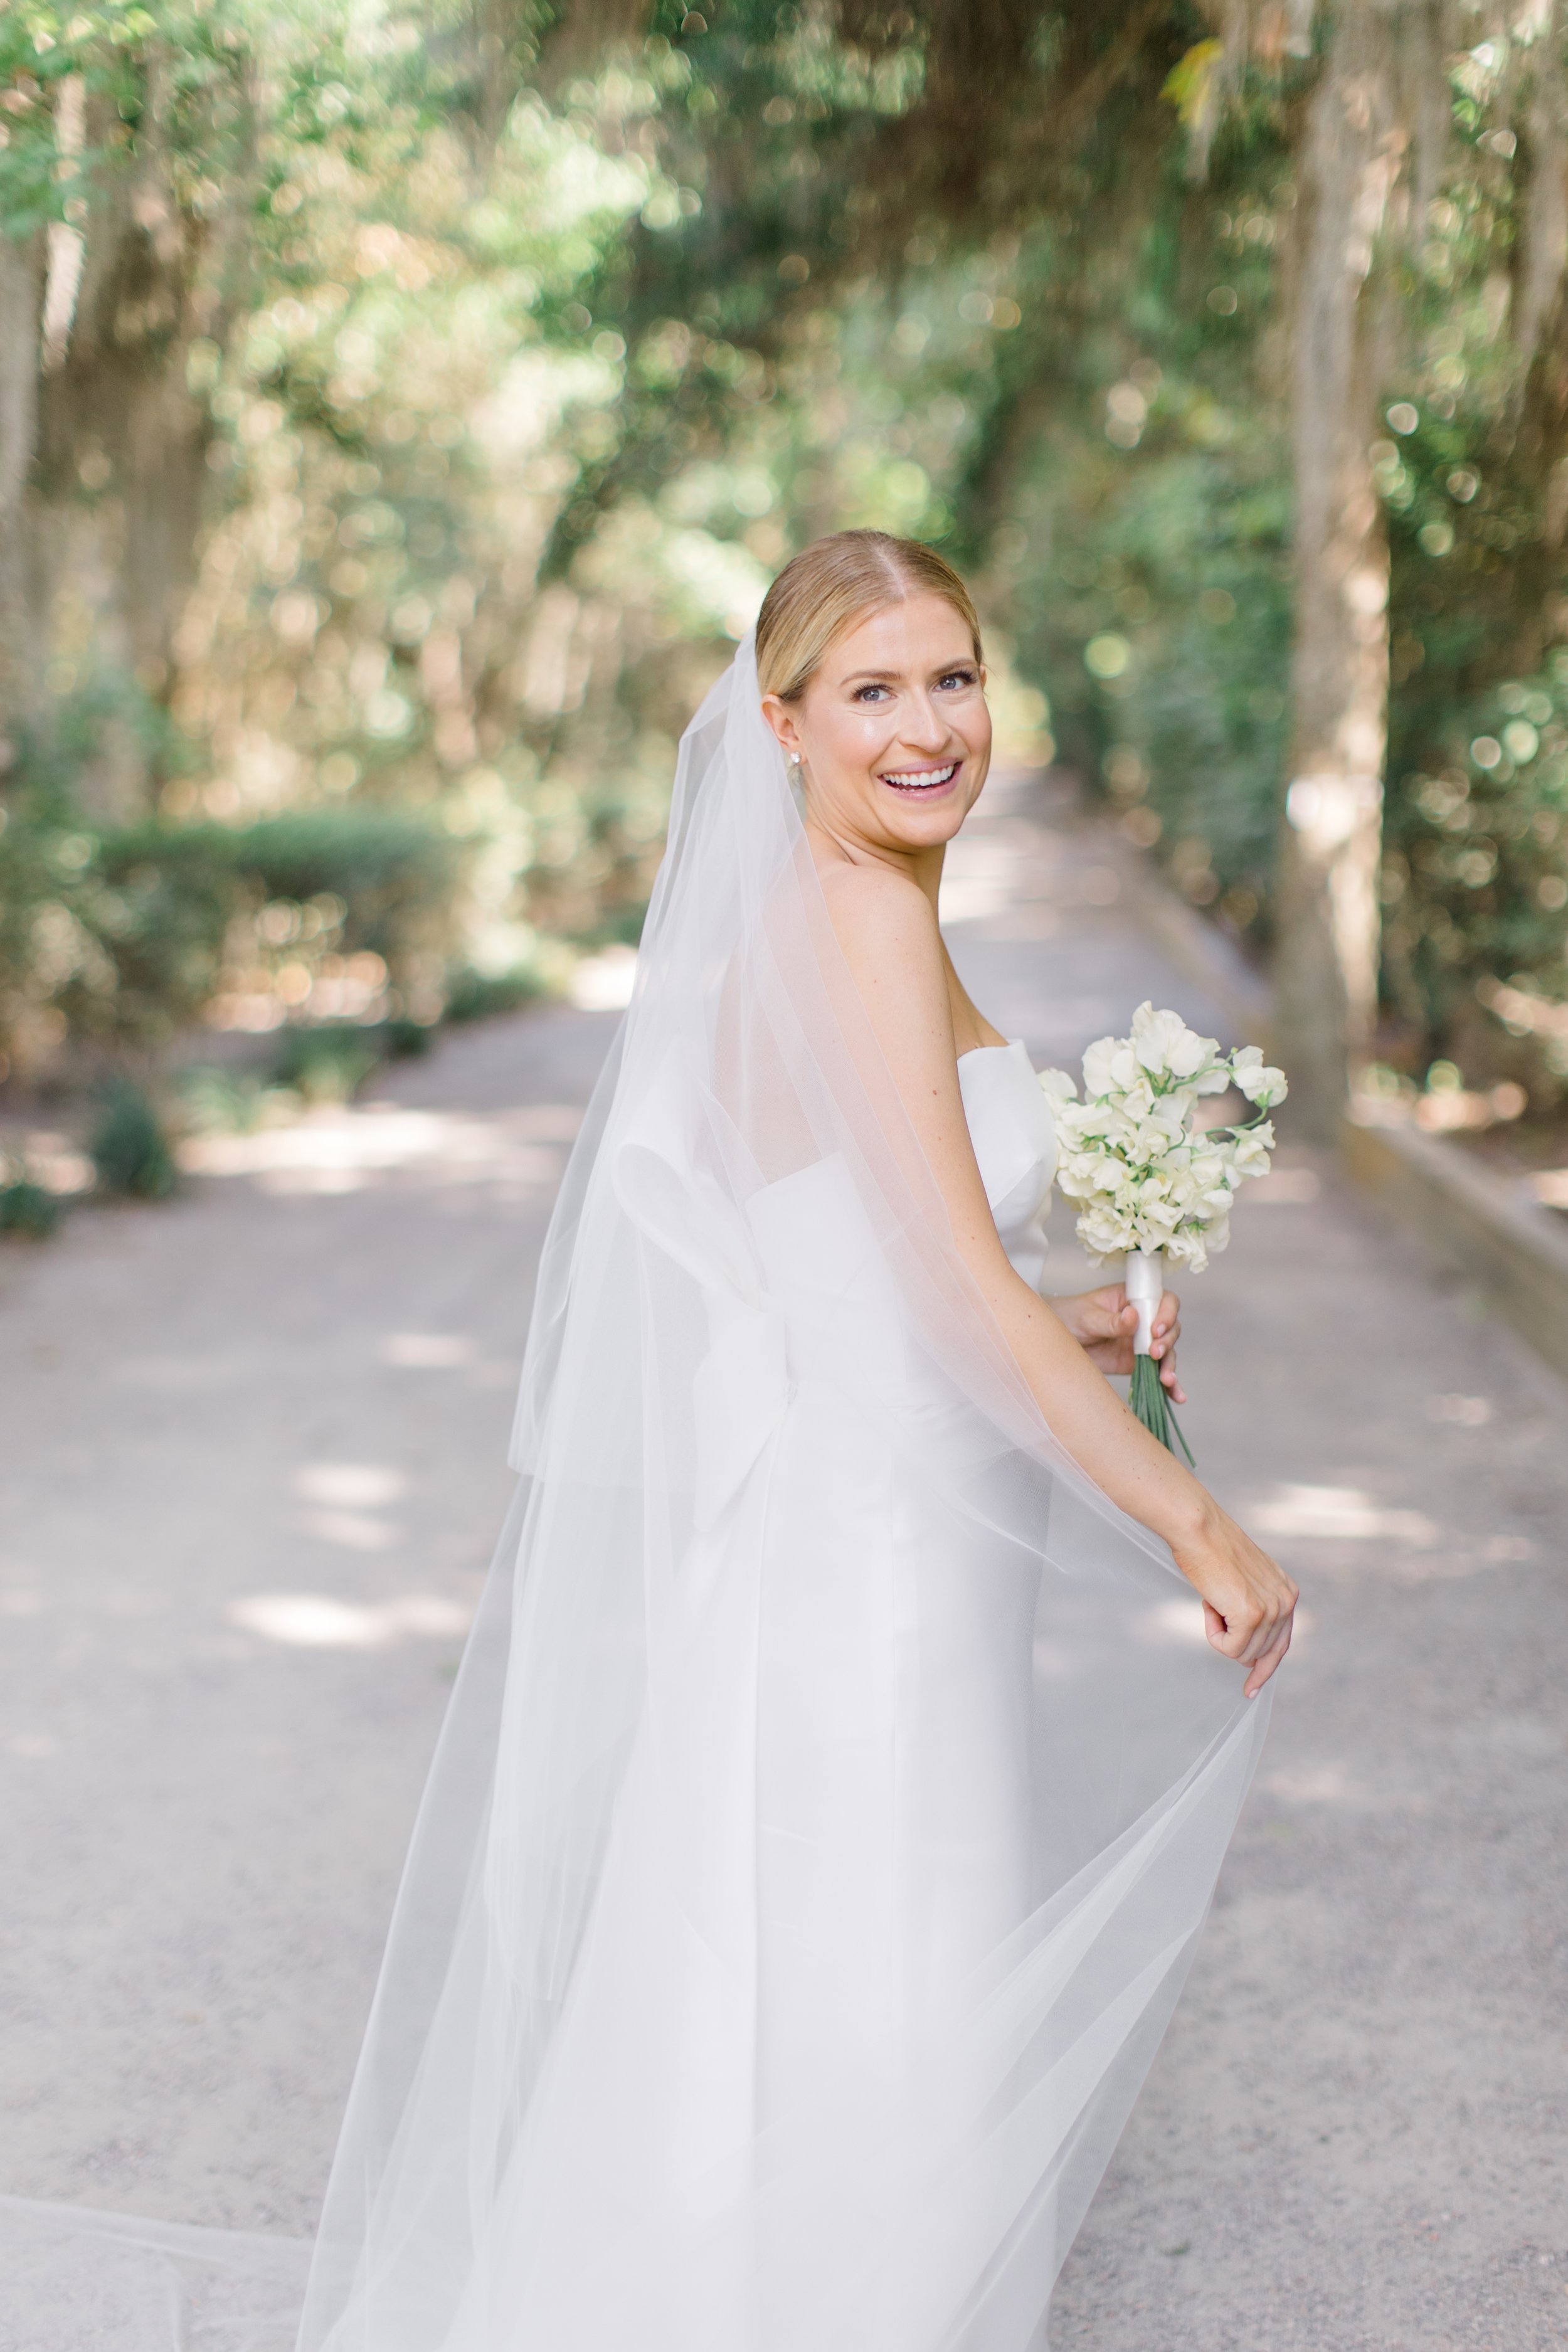 a-southern-chic-south-carolina-wedding-at-the-colleton-river-club-featuring-sophisticated-modern-florals-designed-by-savannah-florist-ivory-and-beau-5.jpg